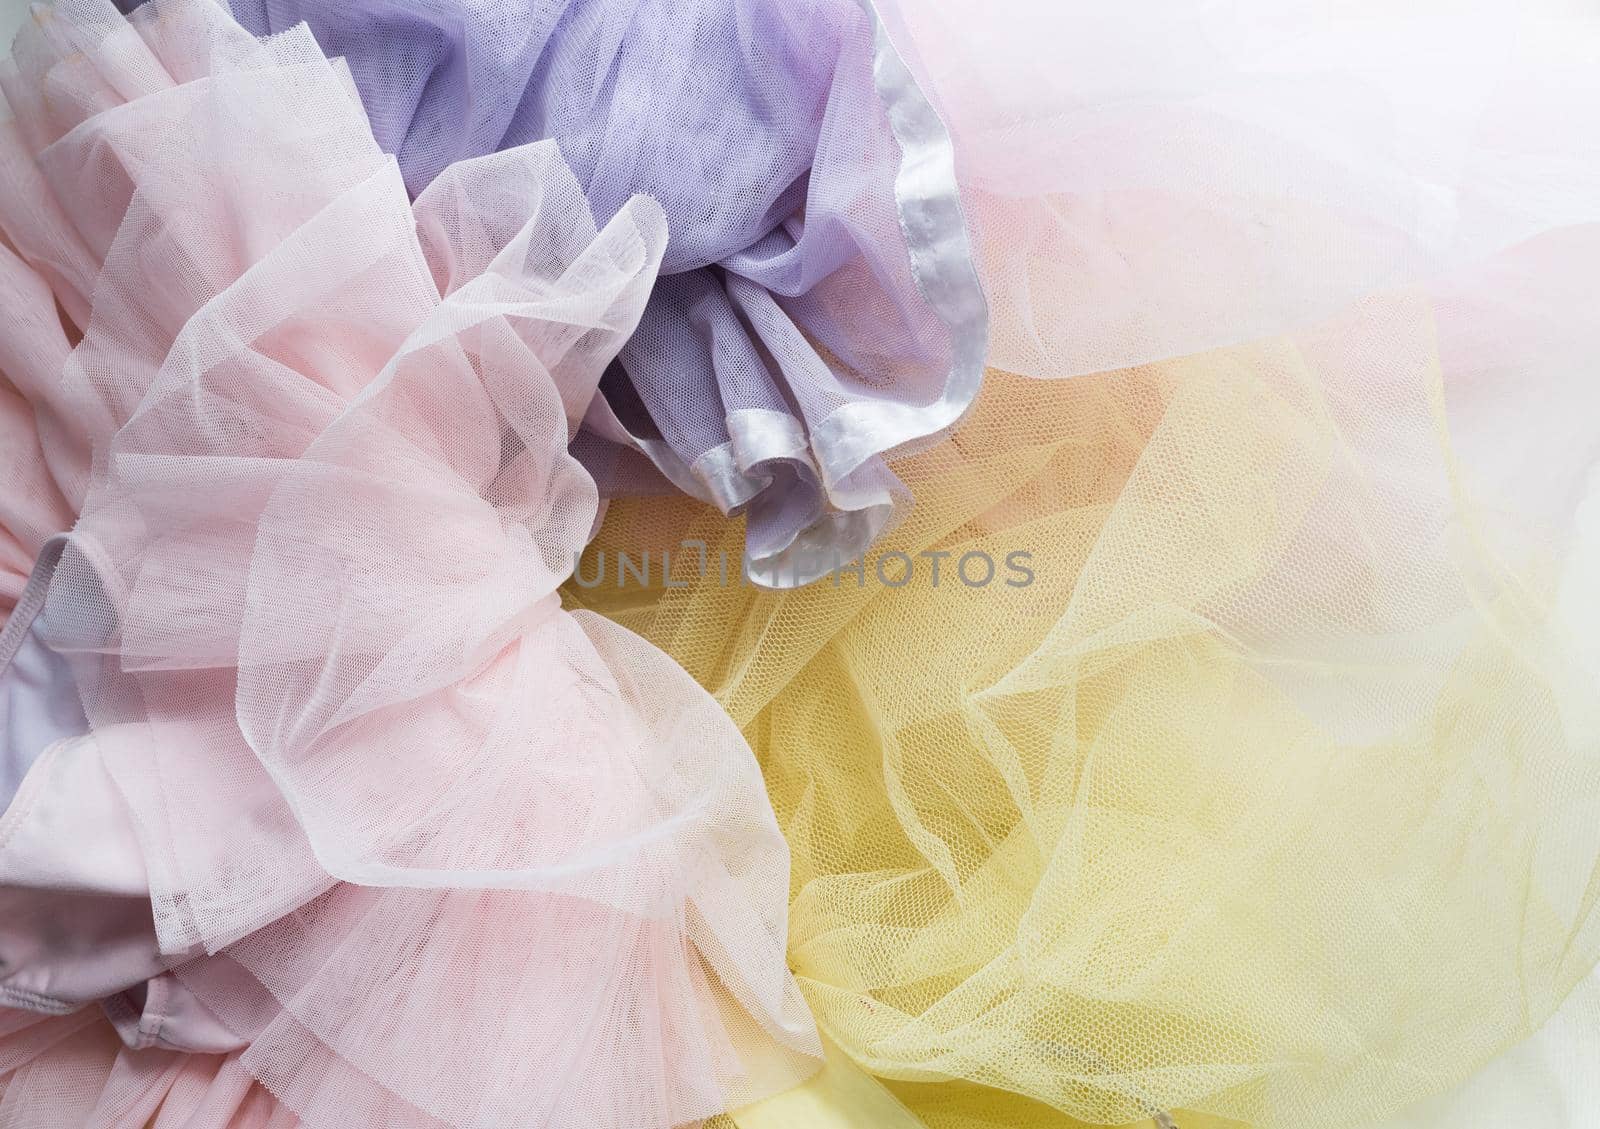 High angle full frame view of little girl's pink, purple and yellow tutus in a pile